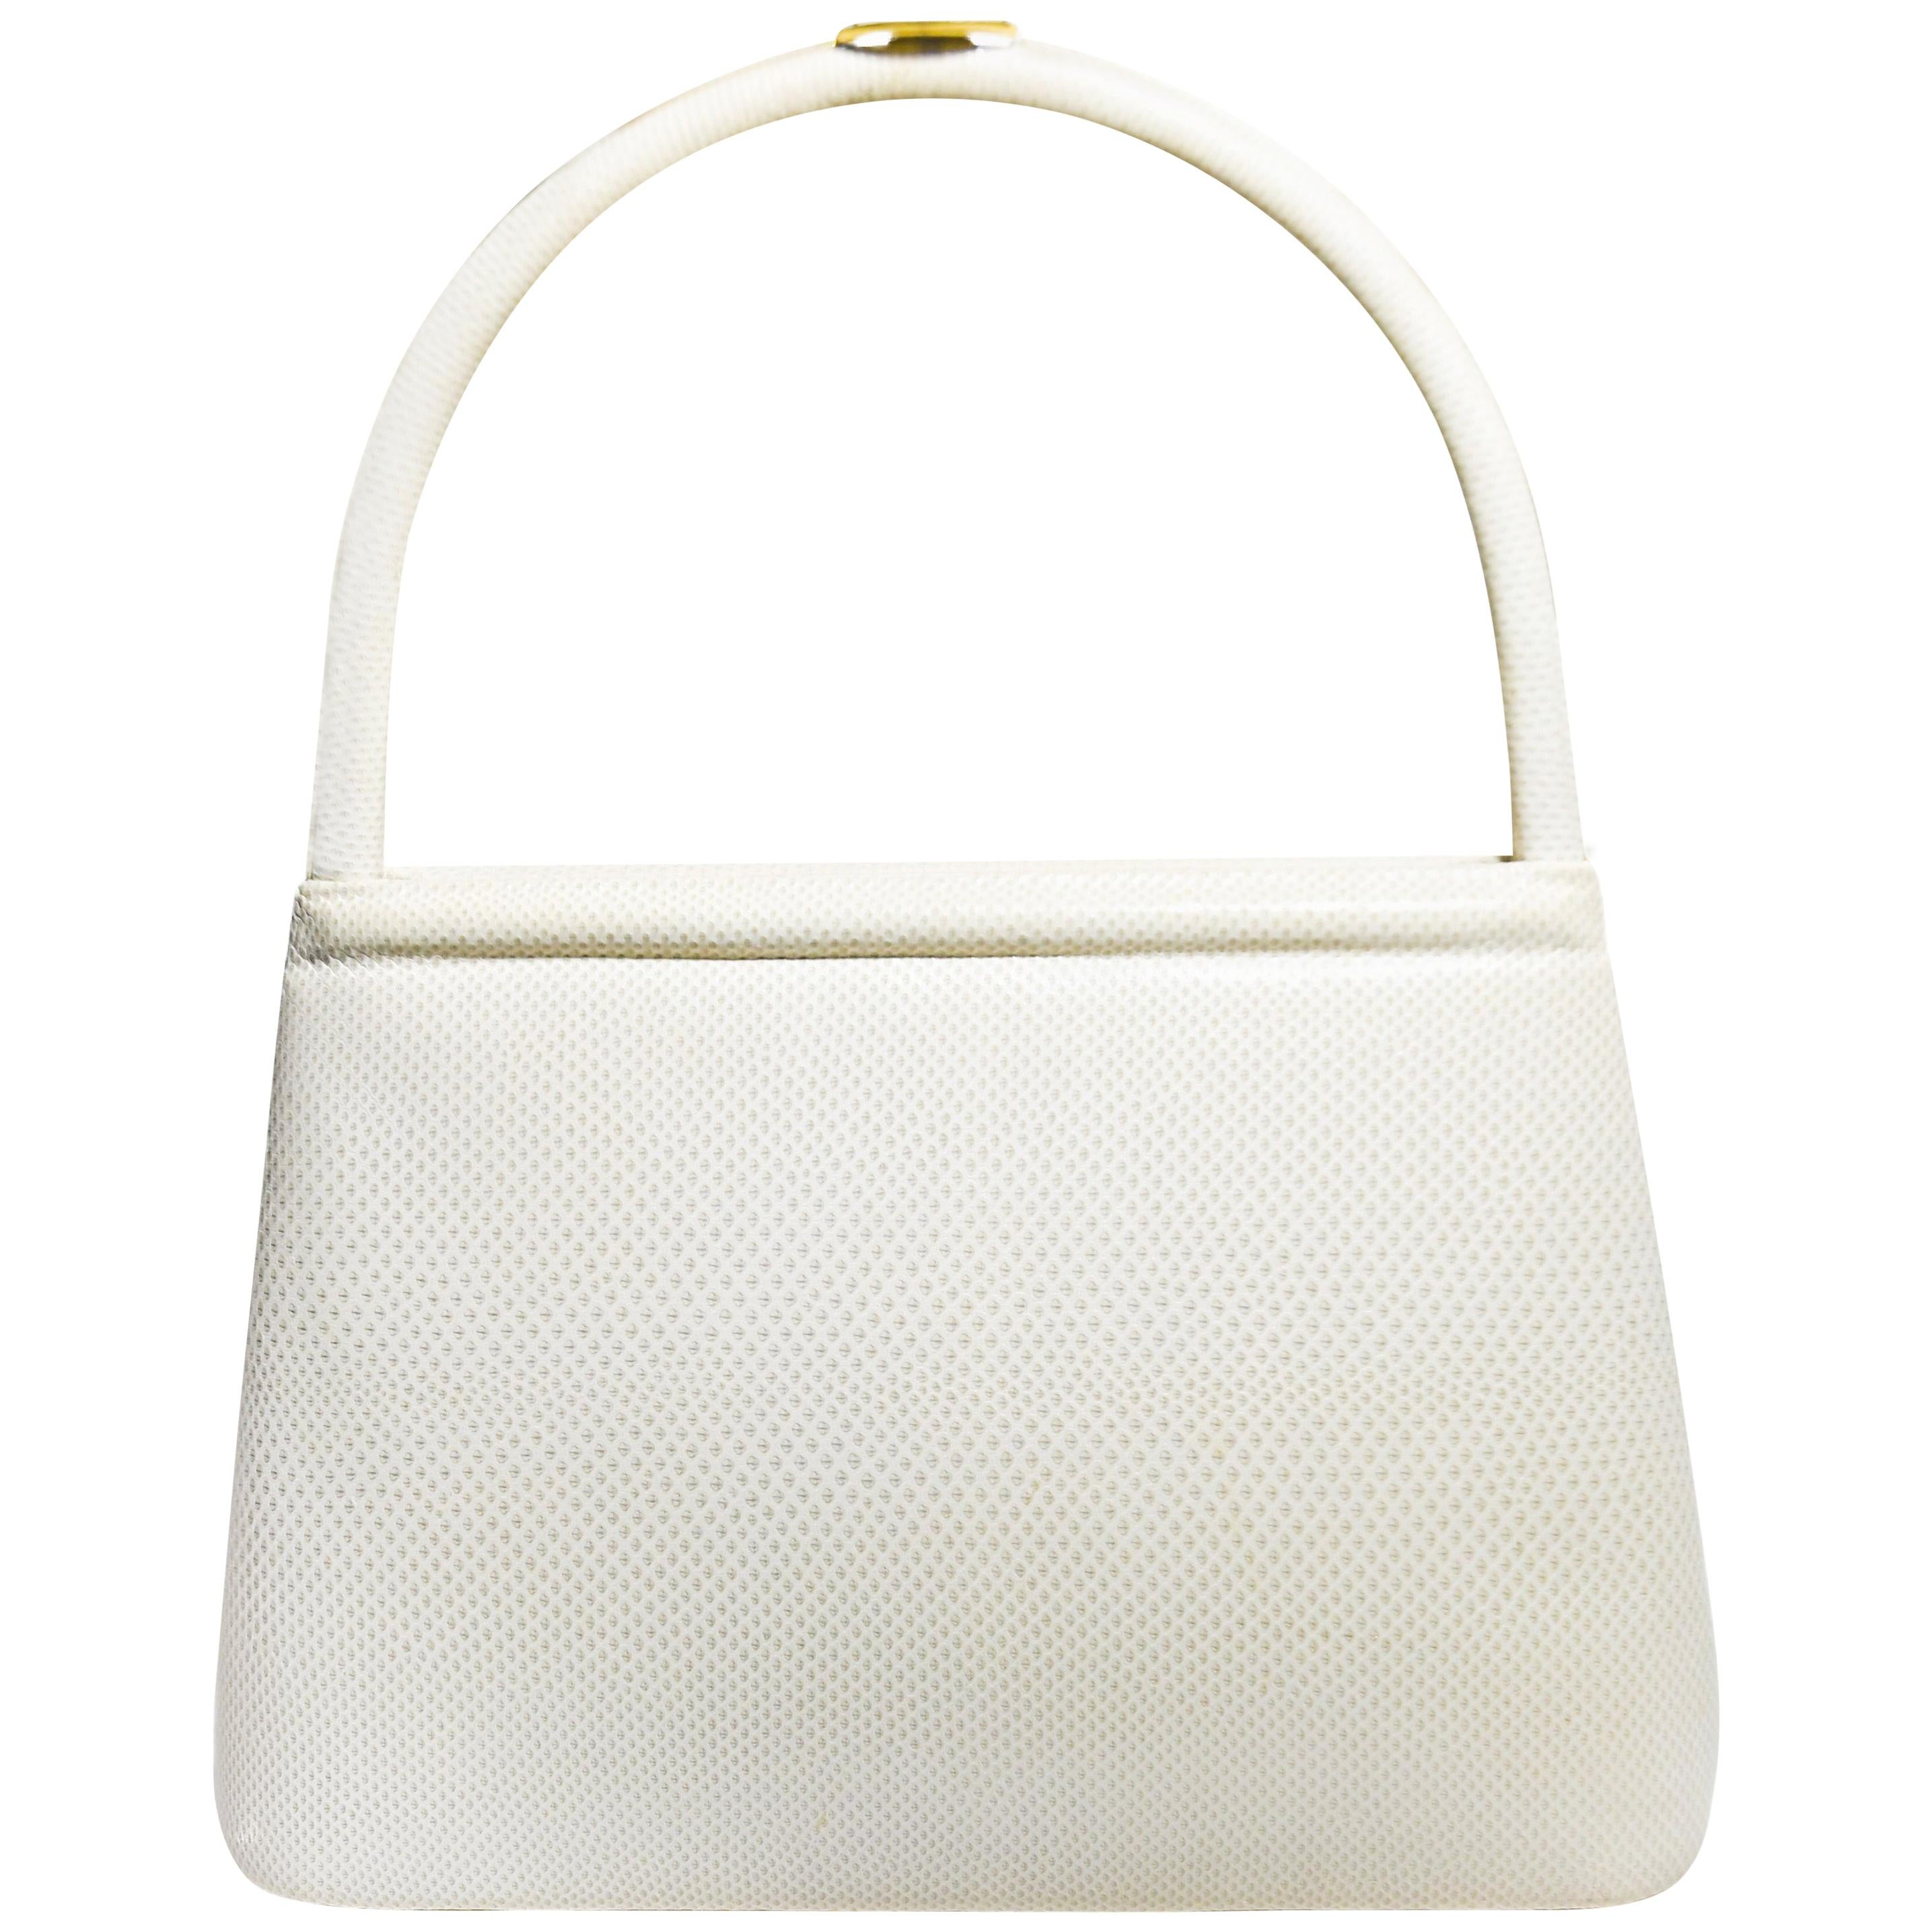 Judith Leiber Ivory Lizard Top Handle Structured Bag For Sale